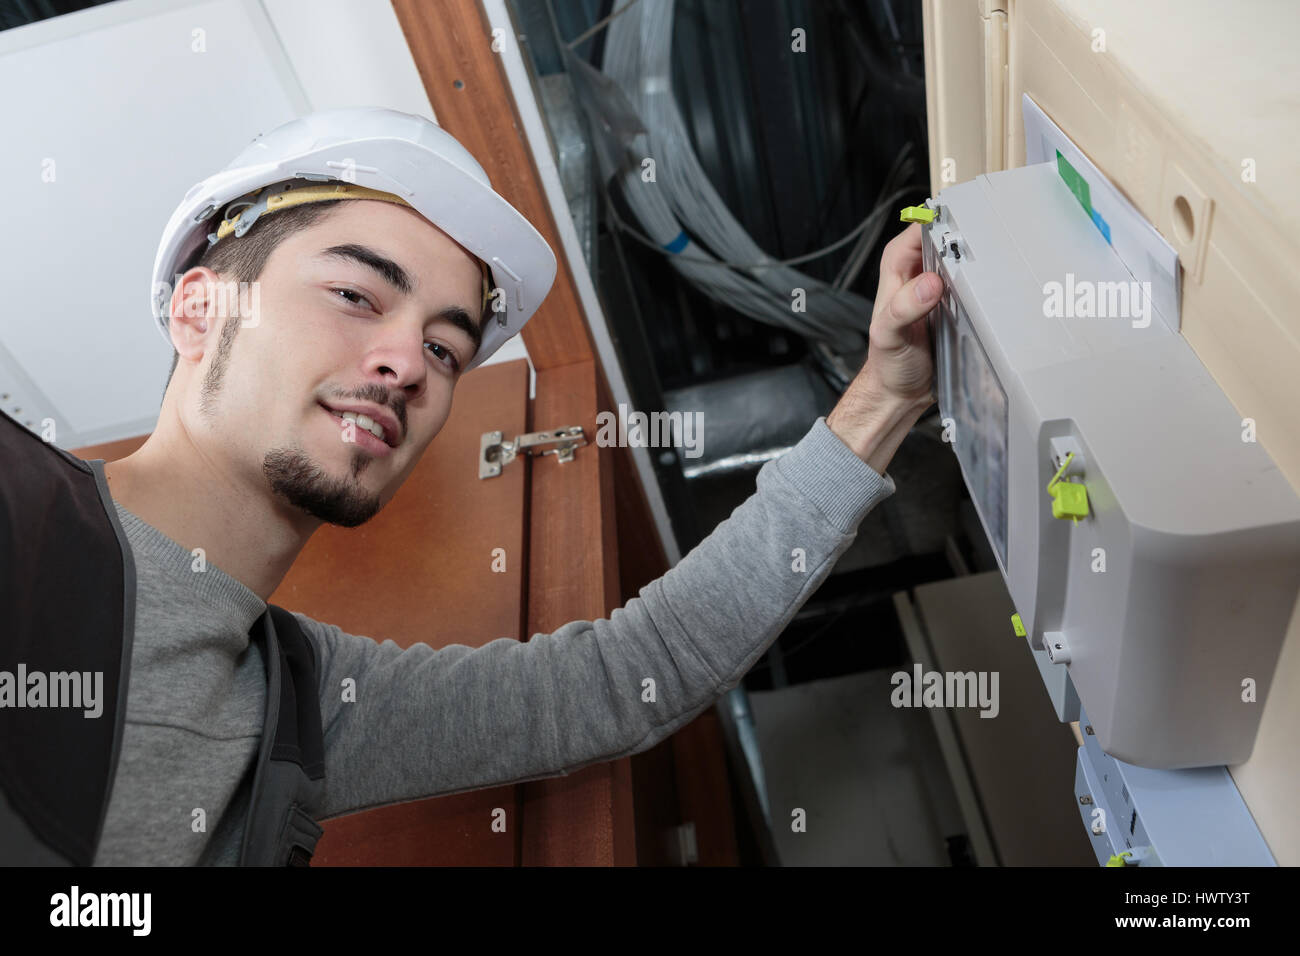 Portrait of man by electric meter Stock Photo